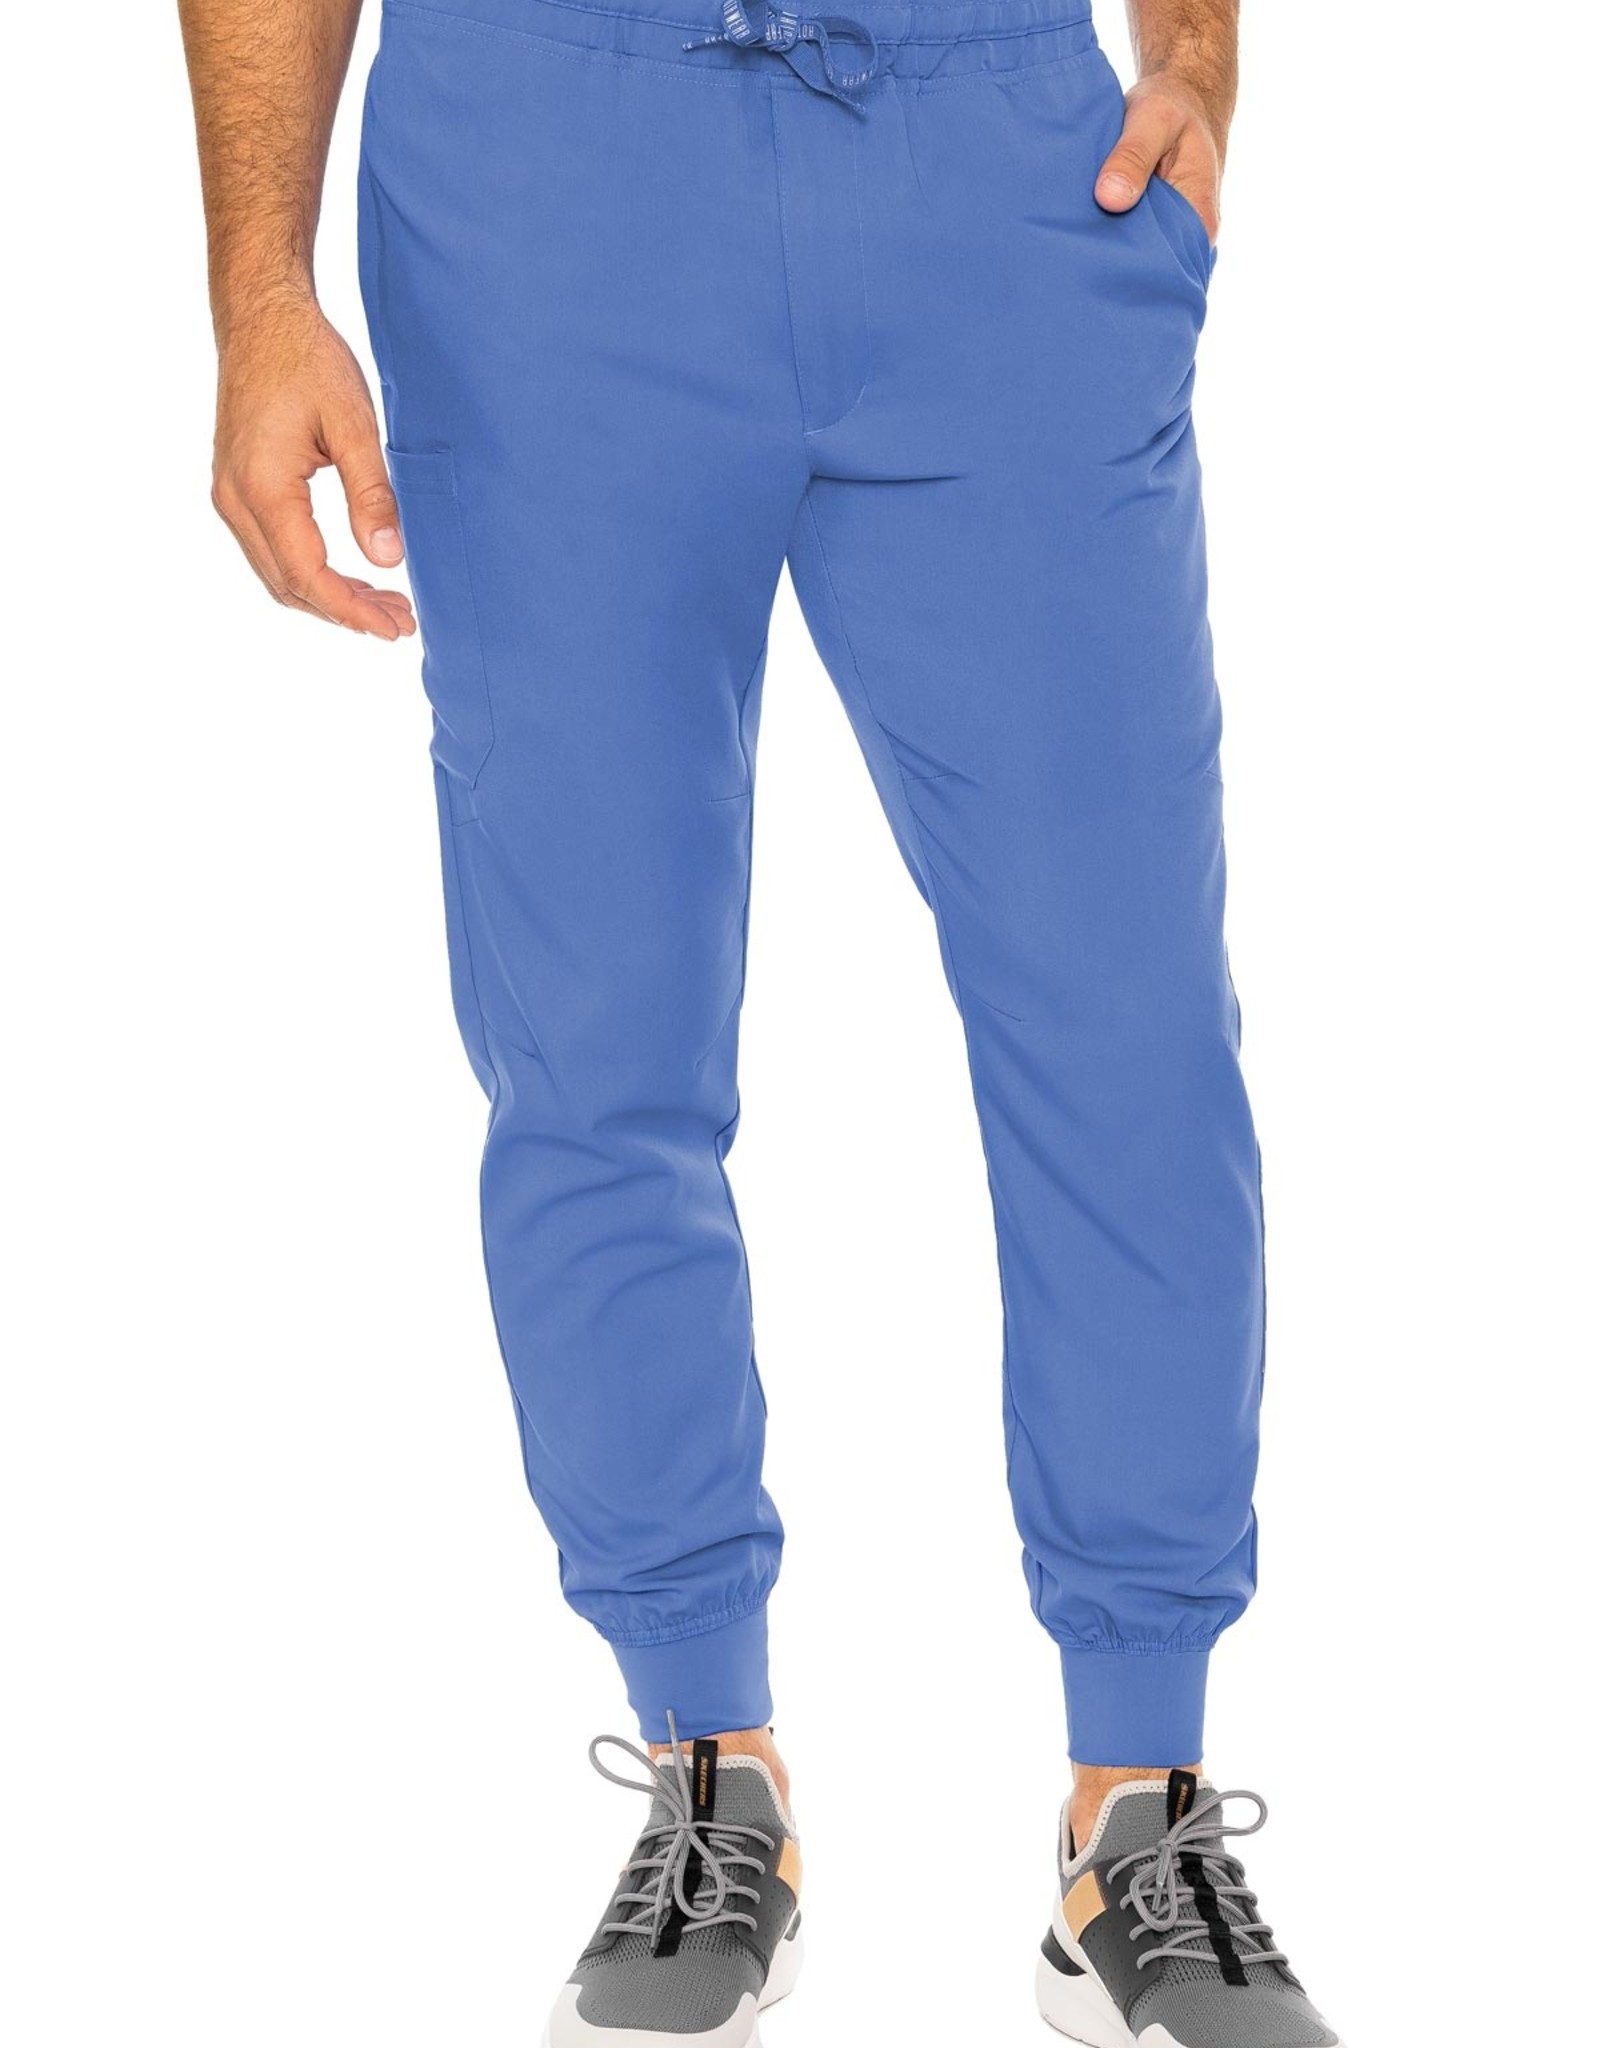 Med Couture Roth Wear Men's "Bowen" Jogger Pant (Regular and Plus Size)